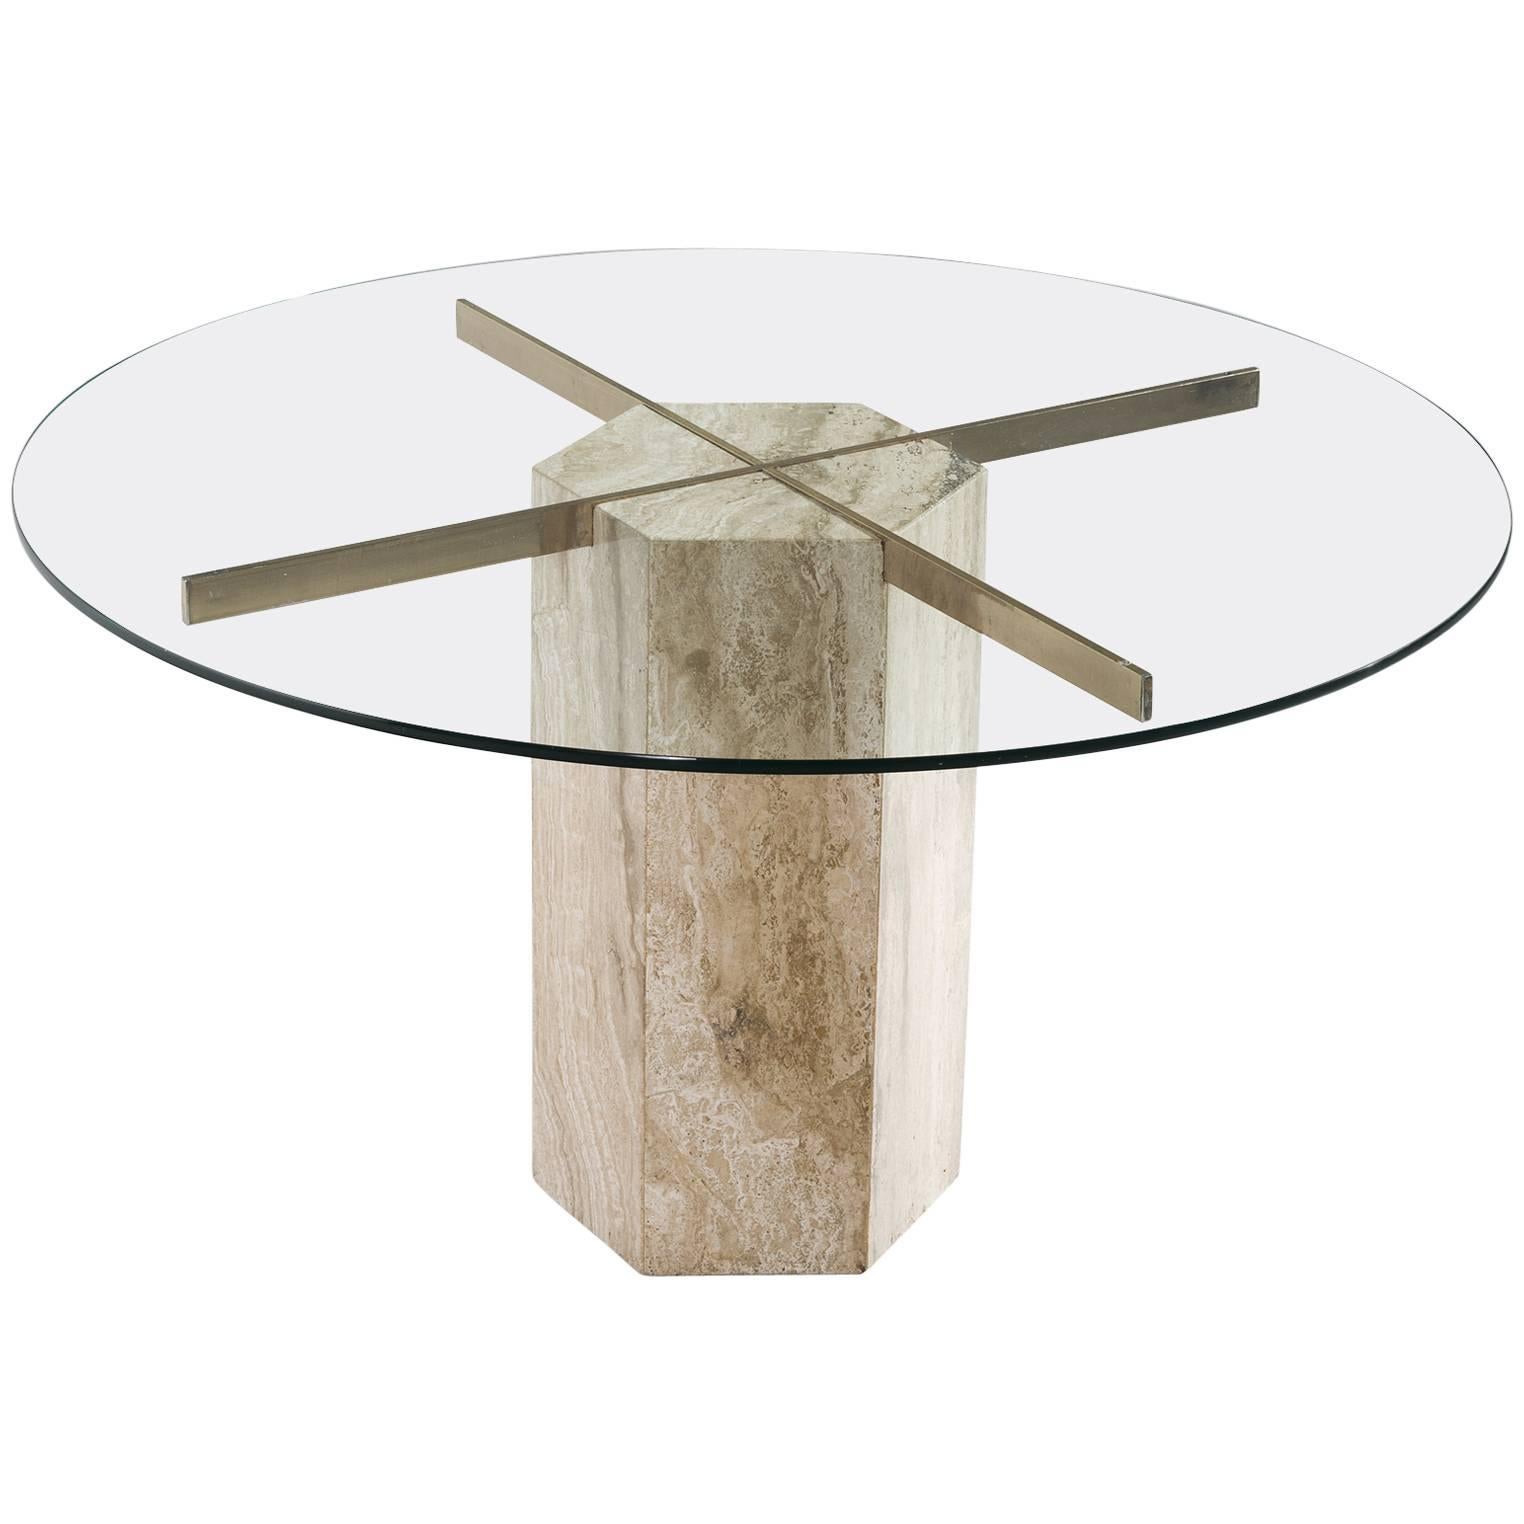 Italian Travertine and Brass Round Dining Table